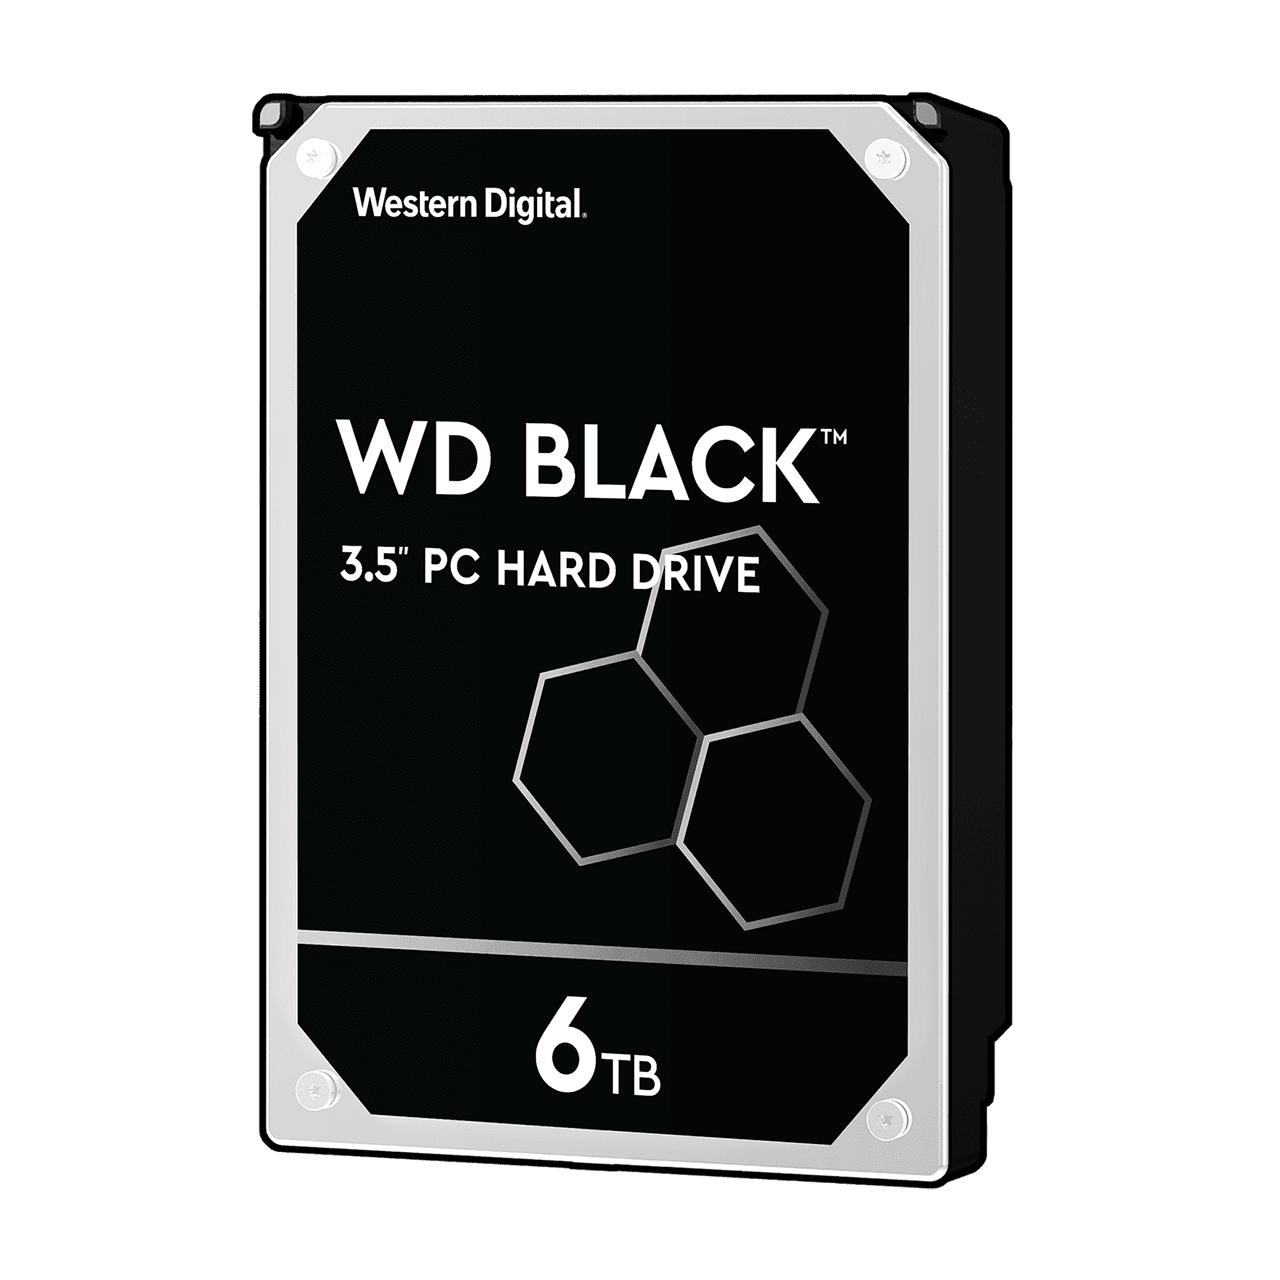 WD Black Performance Desktop Hard Drive 3.5-inch - WINPROMY CONSULTANCY SDN BHD. (1065242-V) All Rights Reserved.